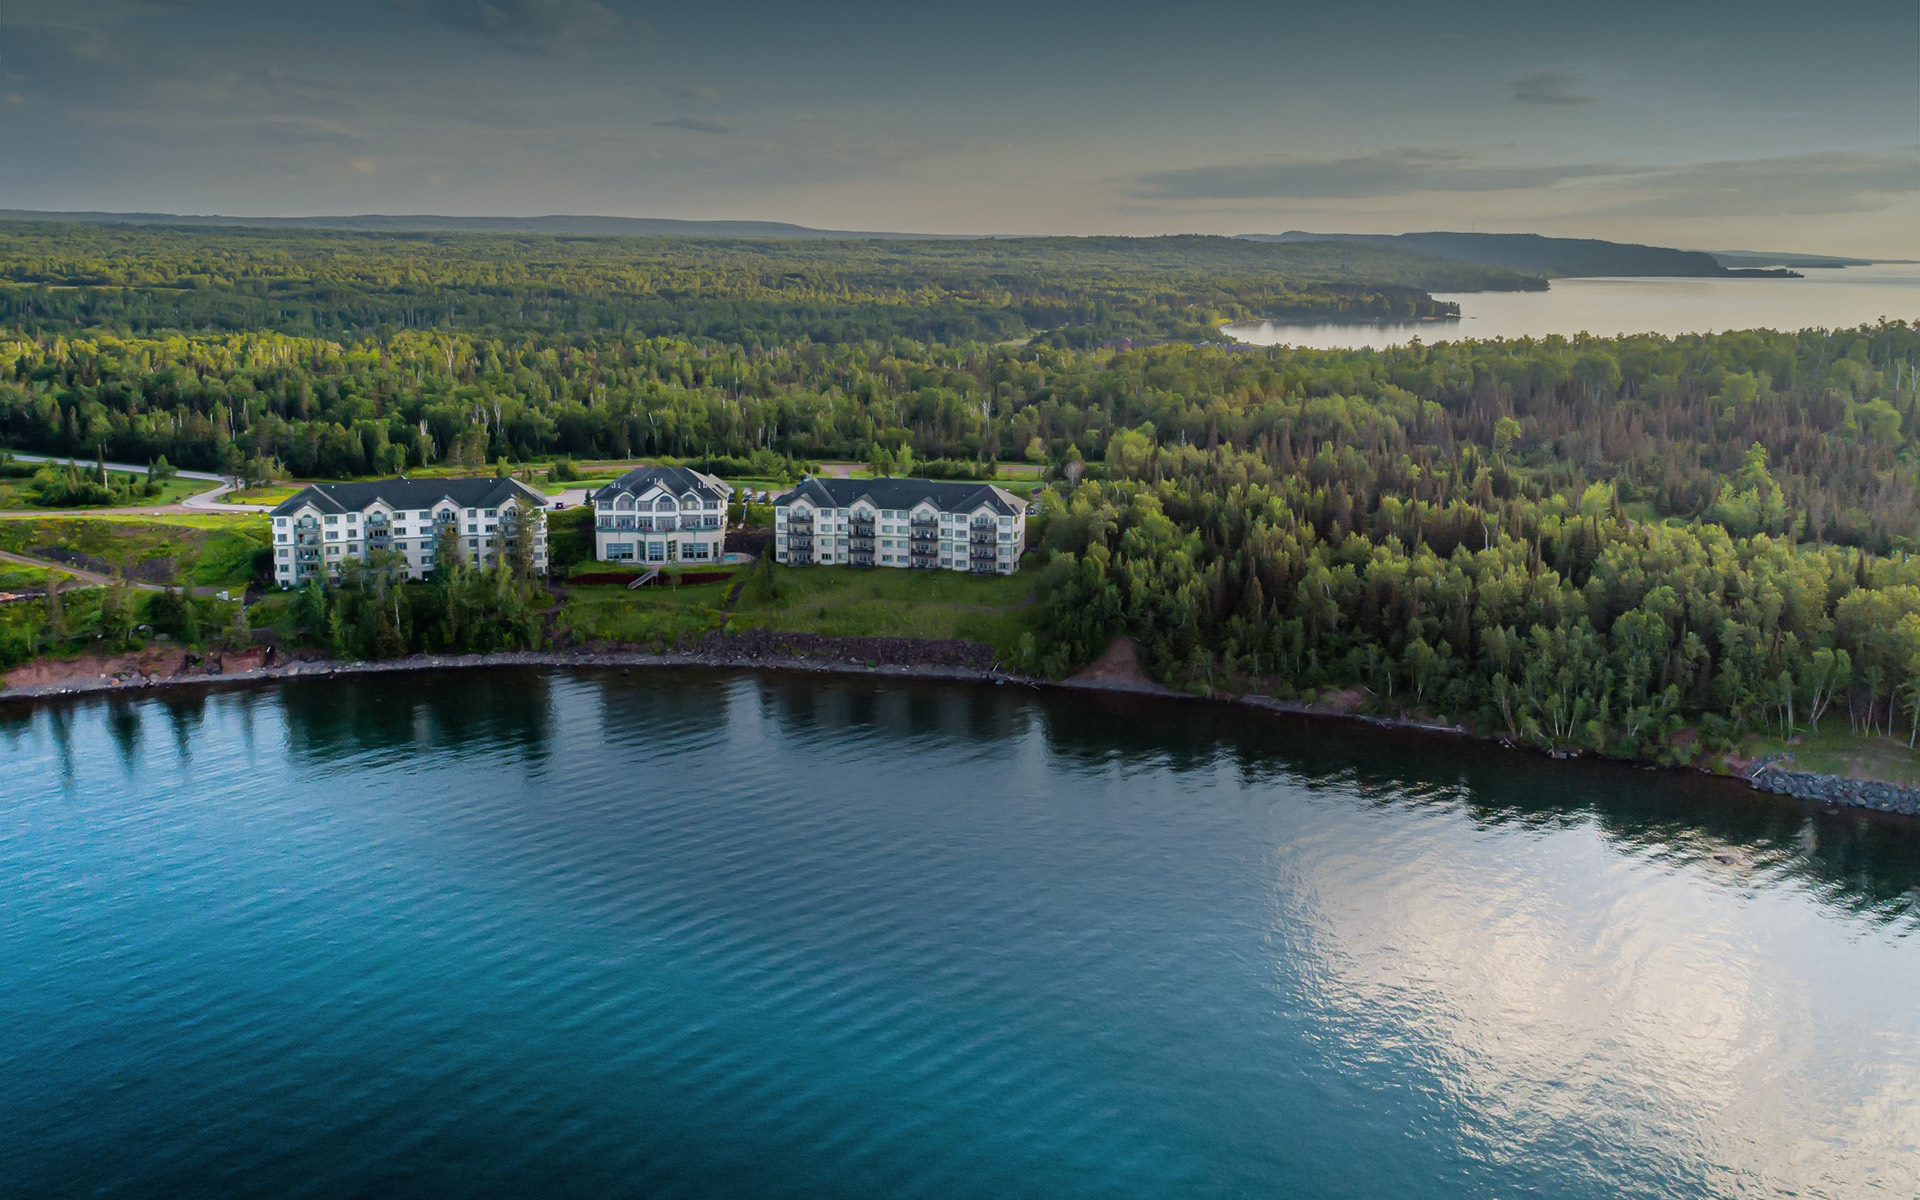 aerial view of resort surrounded by a forest